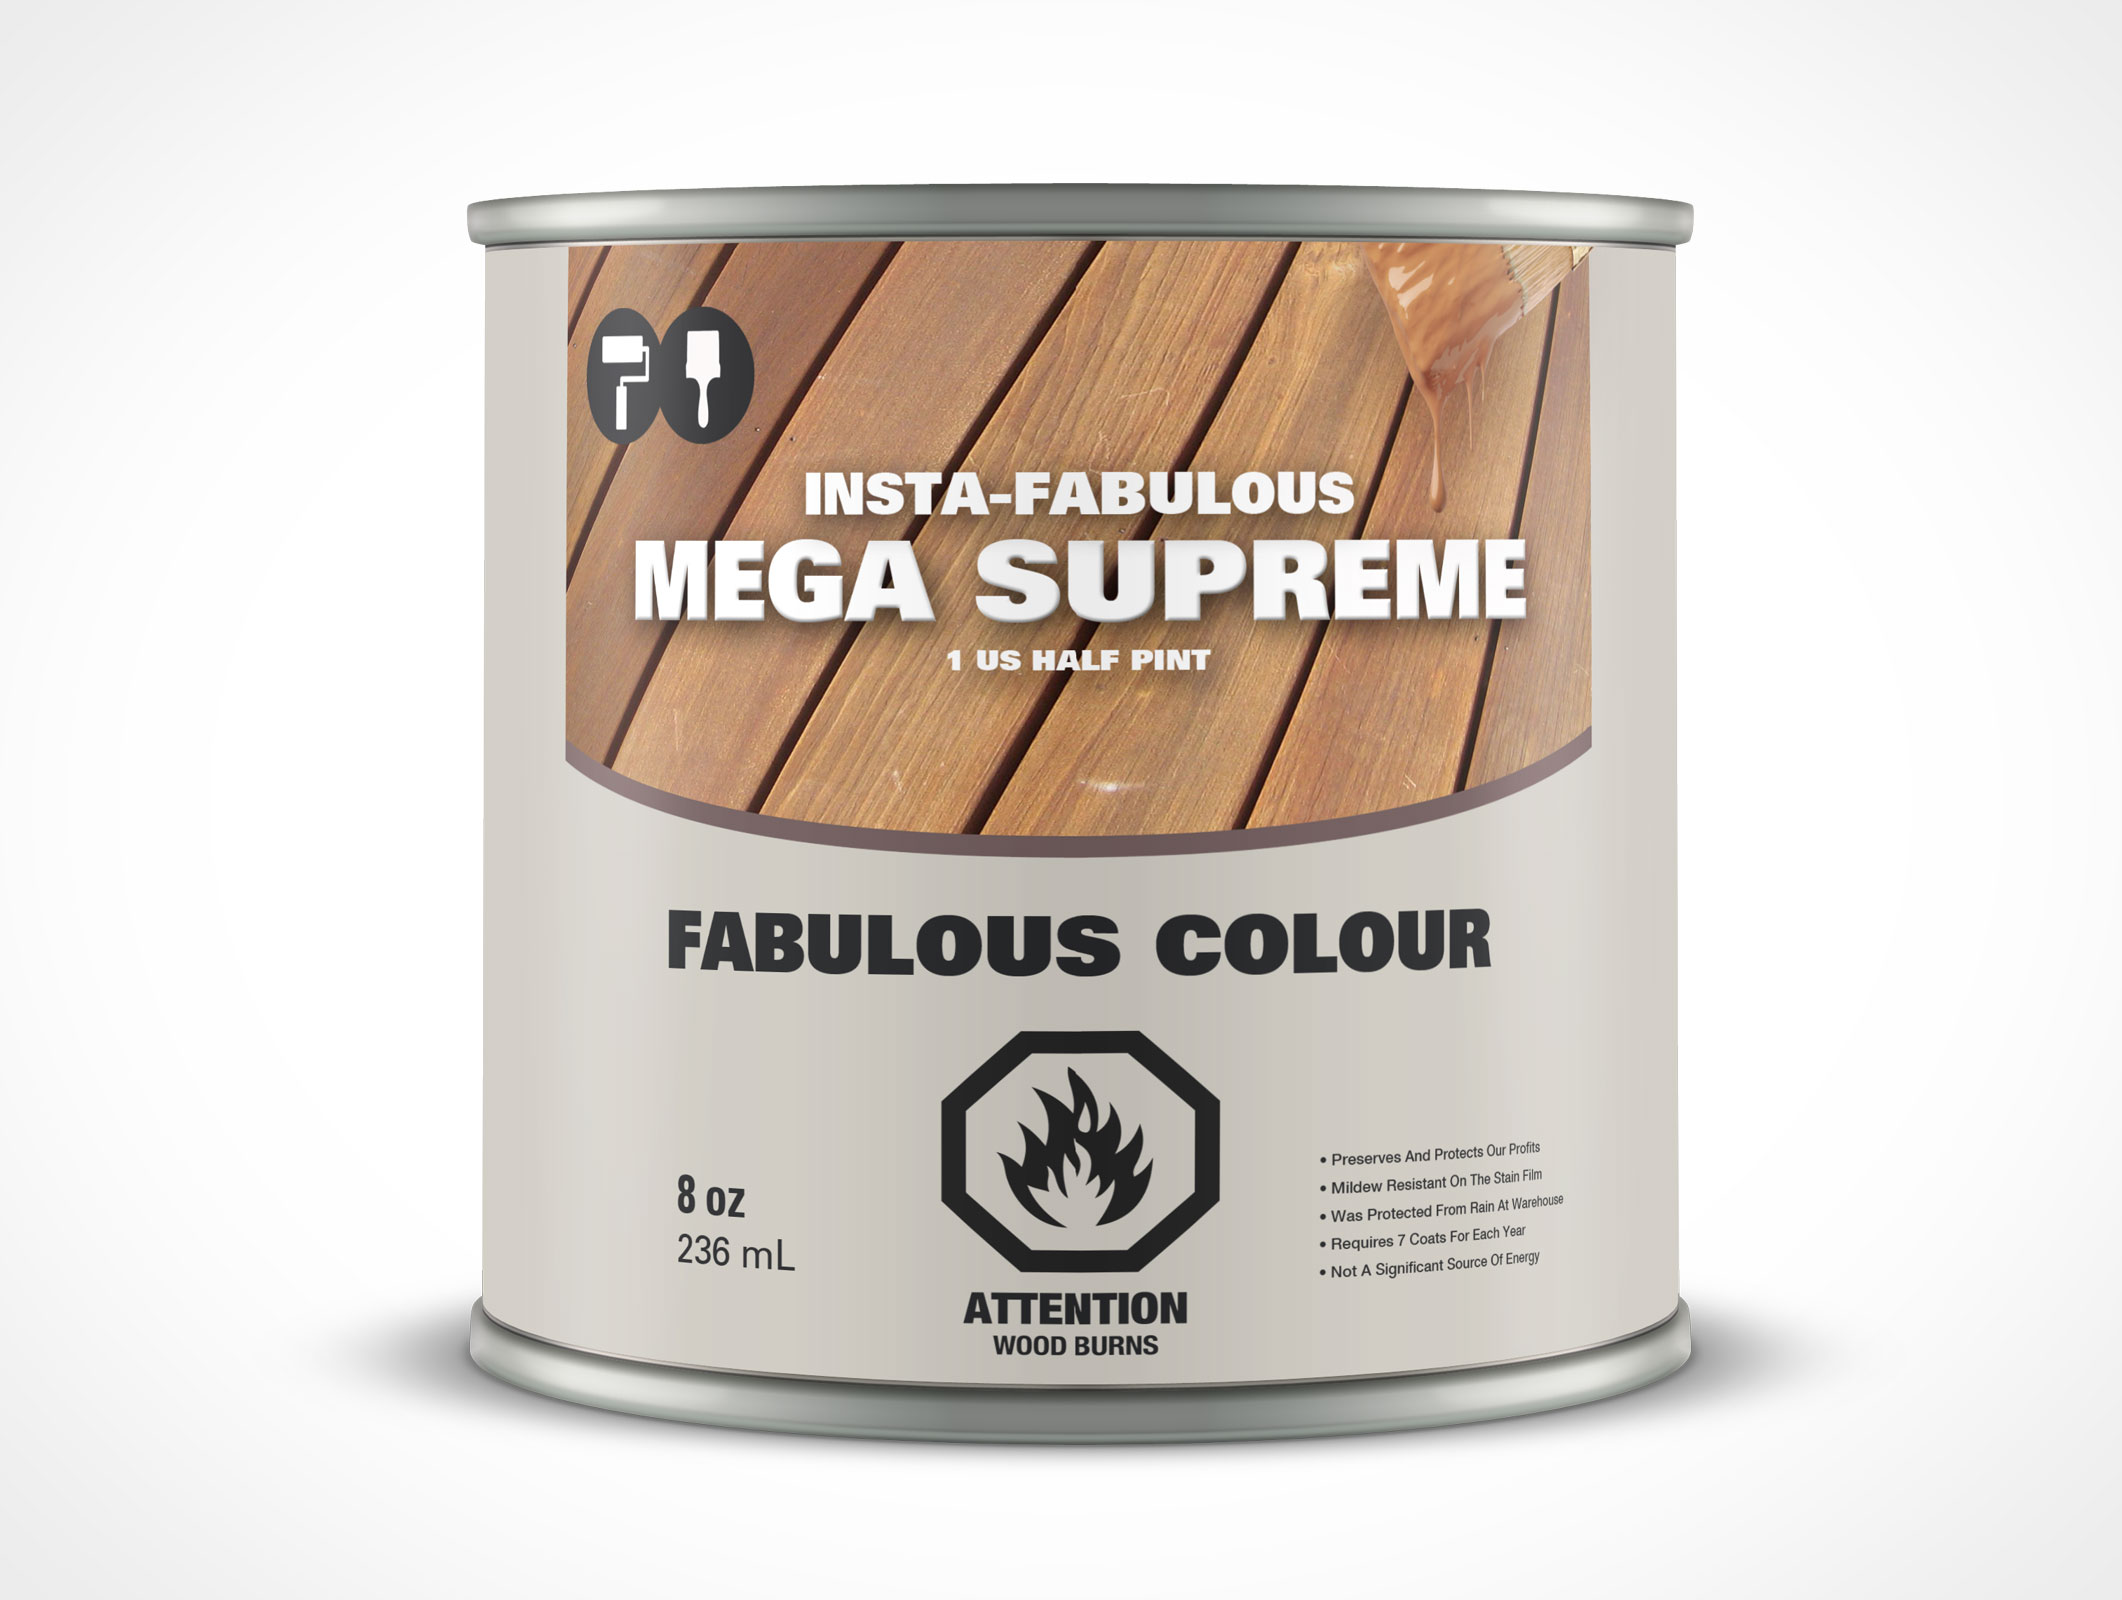 8oz Paint Can Mockup 30r5